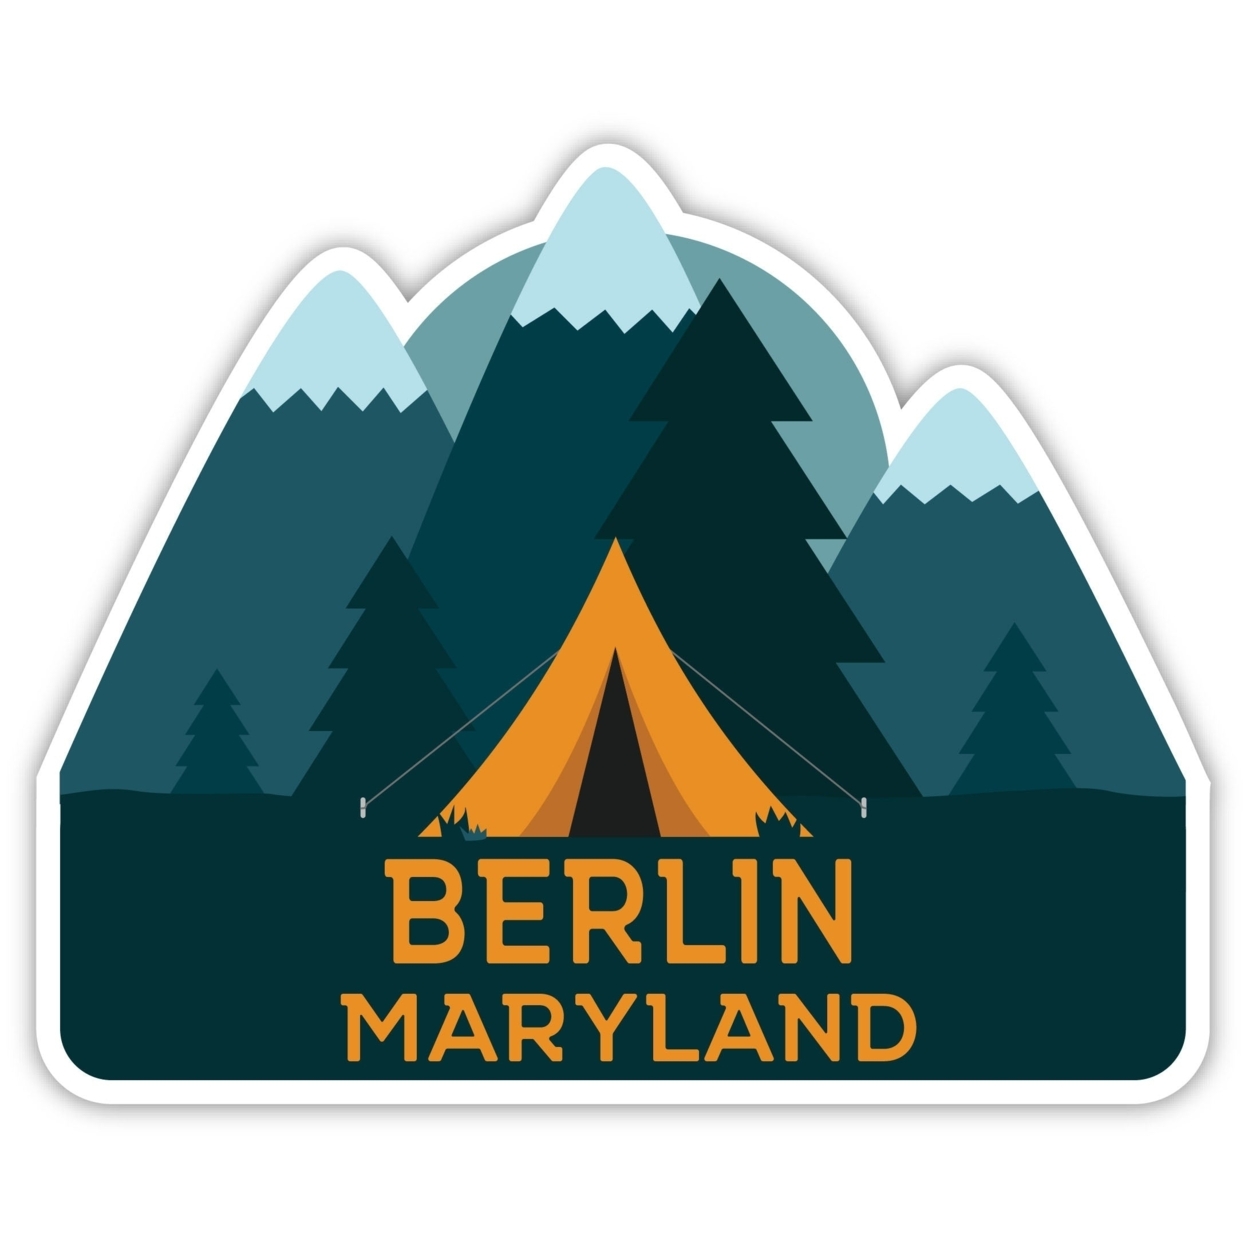 Berlin Maryland Souvenir Decorative Stickers (Choose Theme And Size) - Single Unit, 12-Inch, Tent